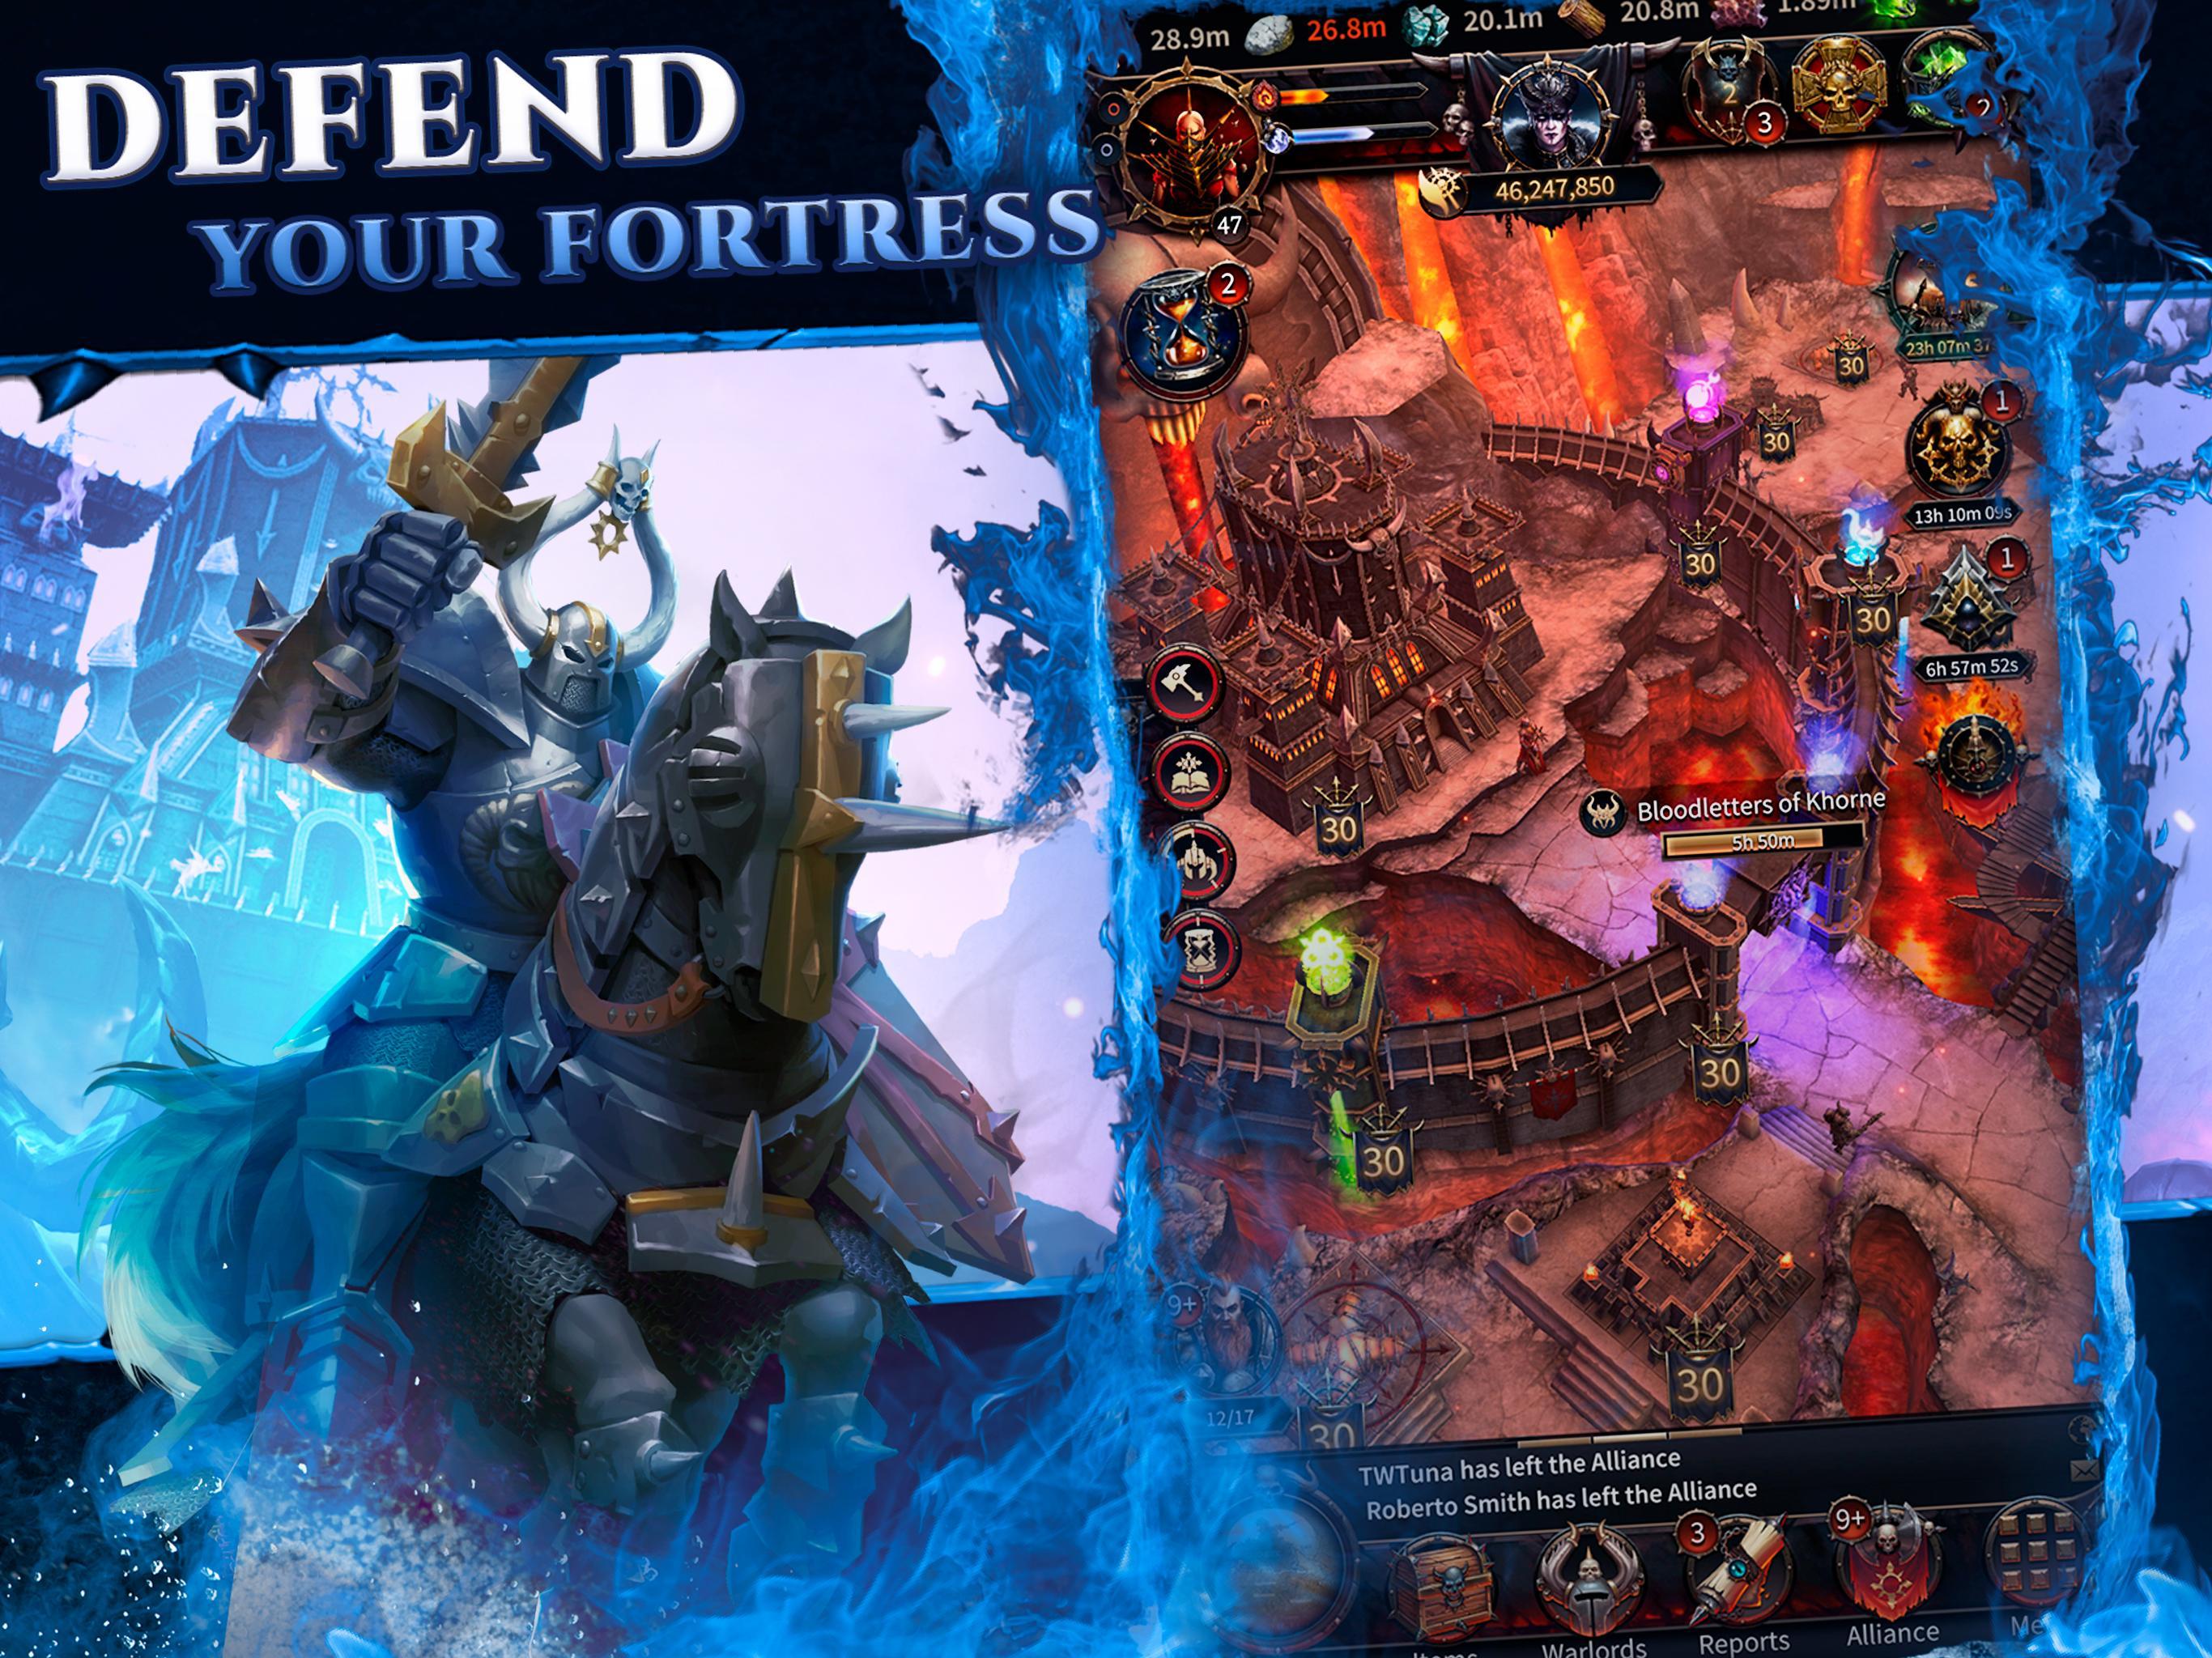 Warhammer: Chaos & Conquest - Real Time Strategy for Android - APK Download